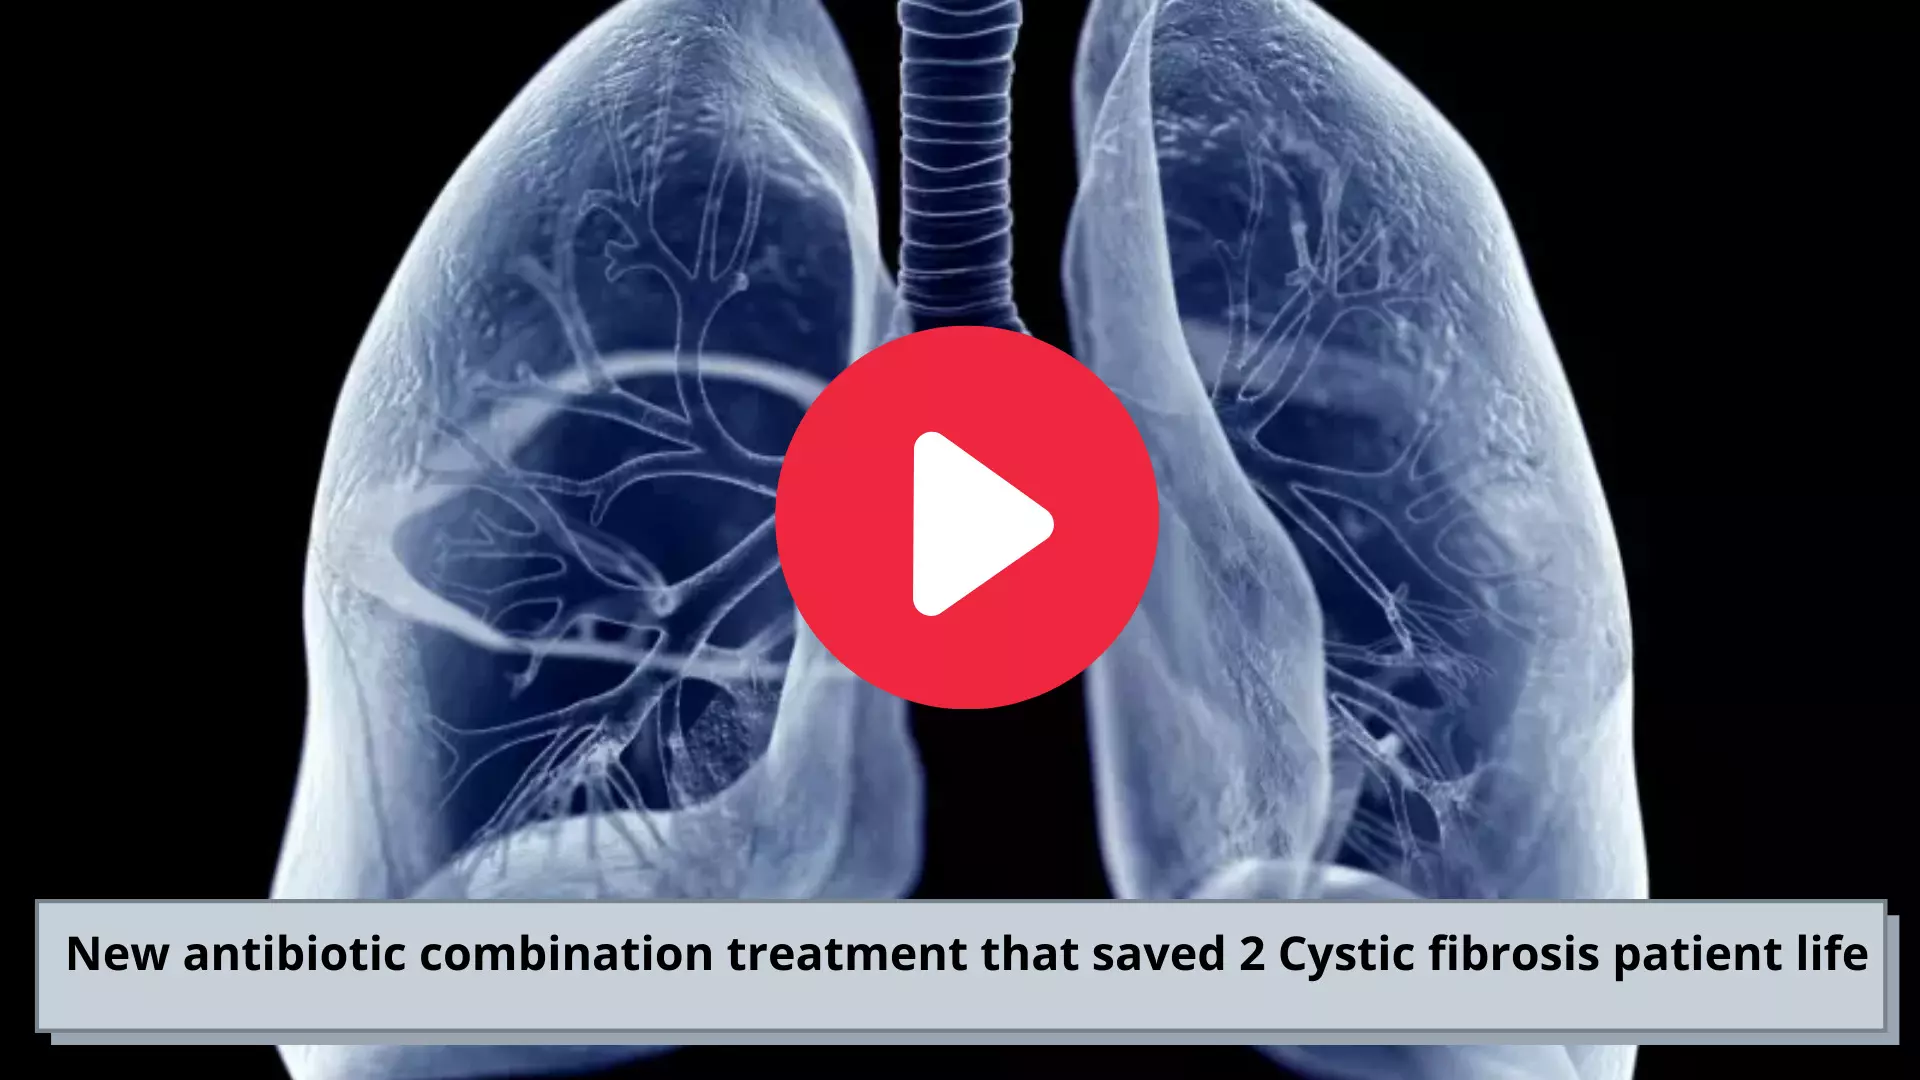 New antibiotic combination treatment to save 2 Cystic fibrosis patient life